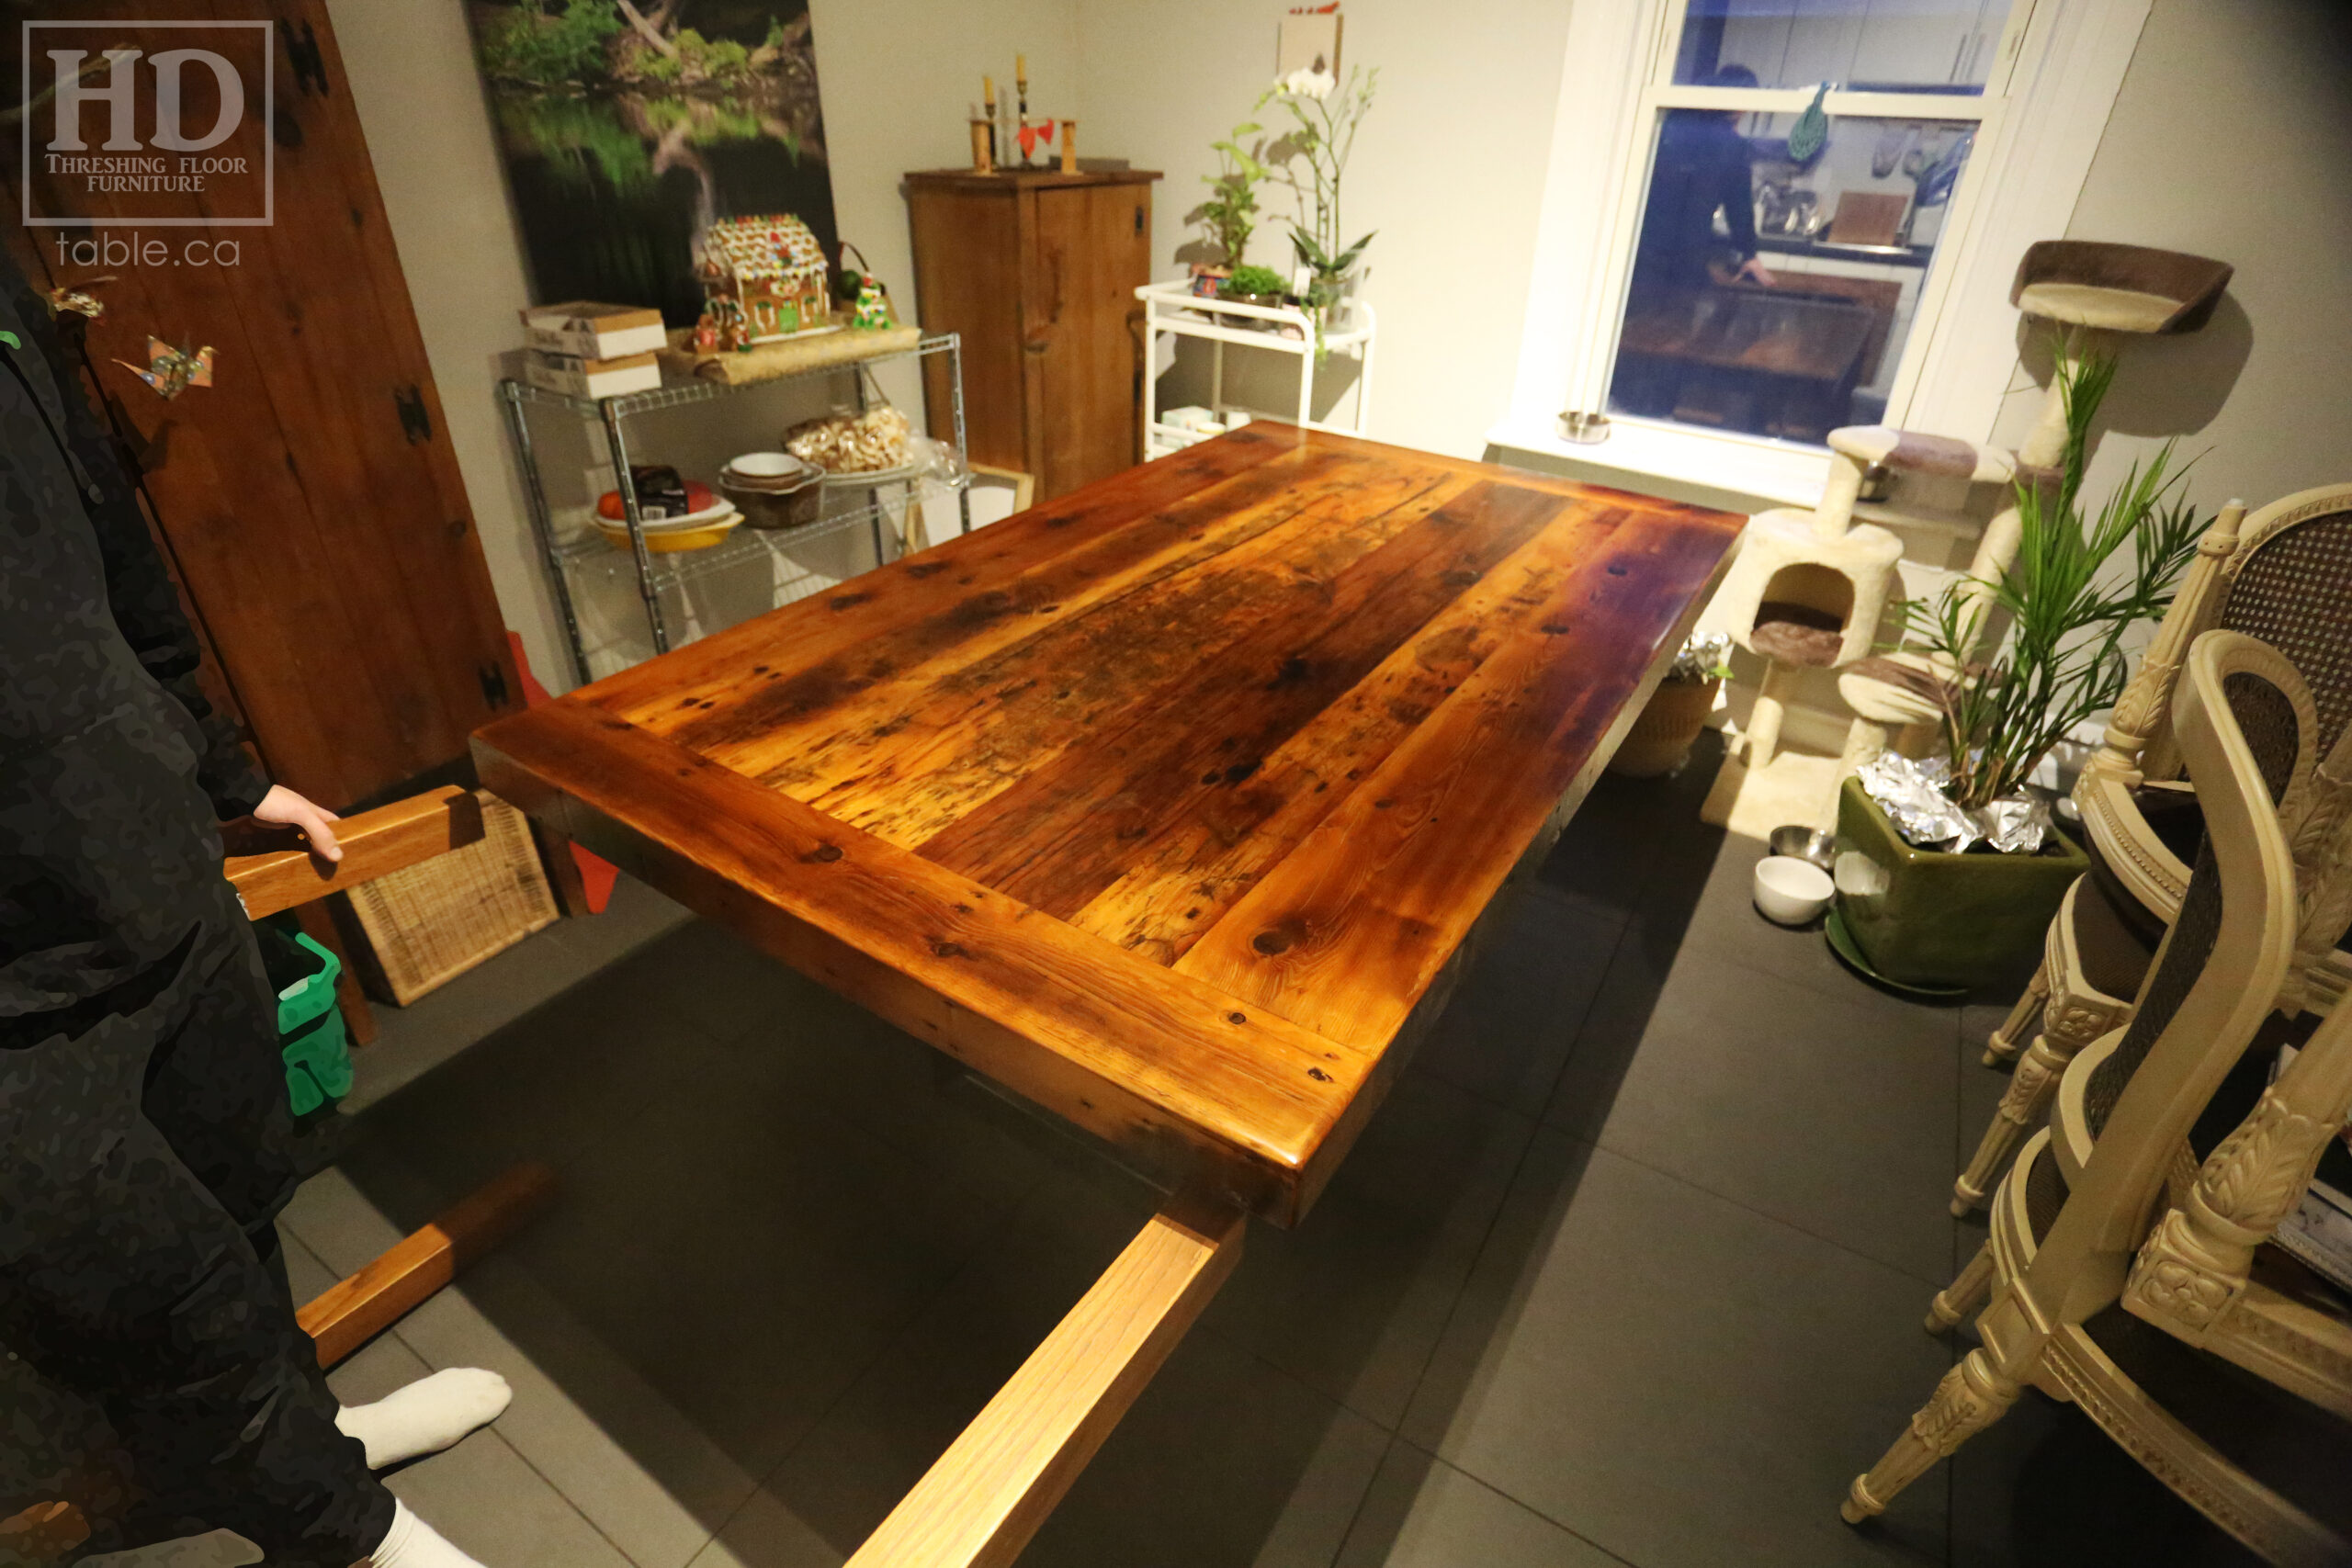 6' Reclaimed Ontario Barnwood Table we made for a Guelph home - 42" wide - 3" Joist Material Top Option - Metal U Shaped Stainless Base - Old Growth Hemlock Threshing Floor Construction - Original edges & distressing maintained - Premium epoxy + satin polyurethane finish - www.table.ca